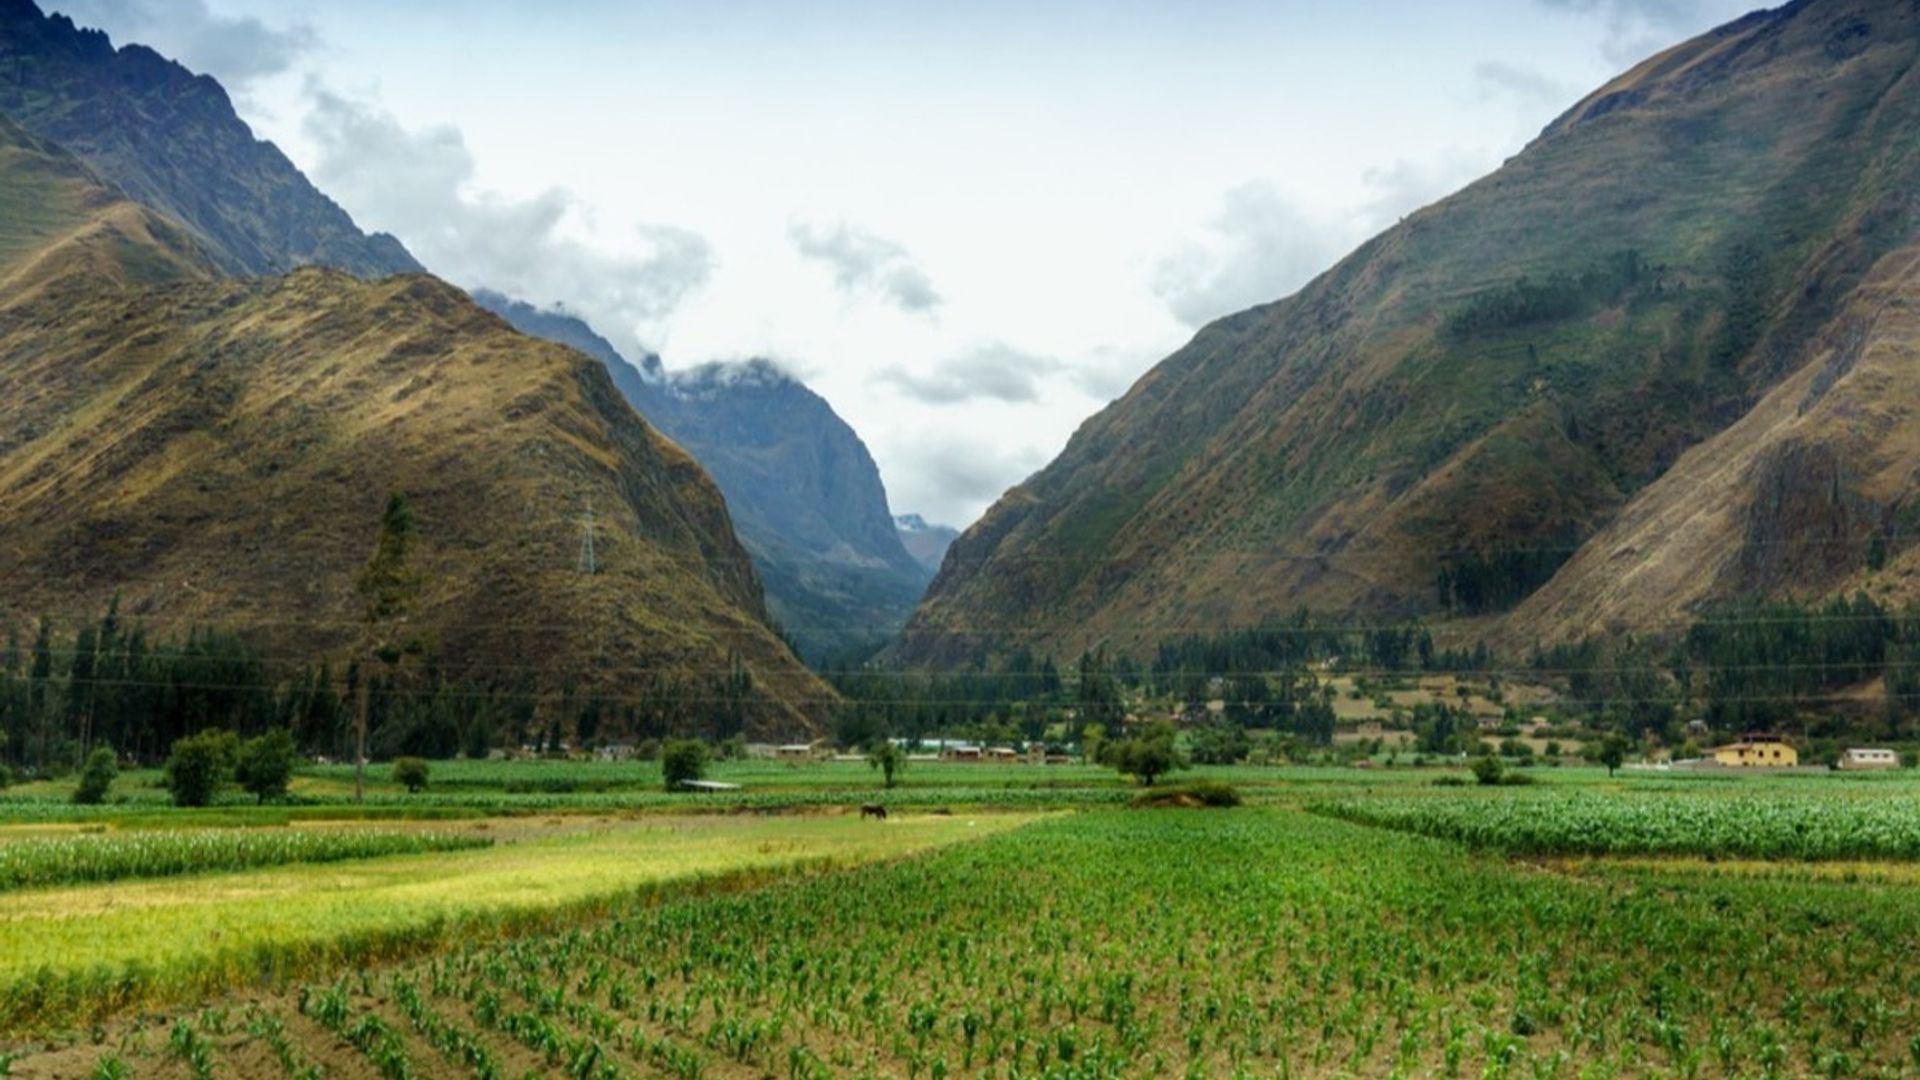 Image of an agricultural field in Peru